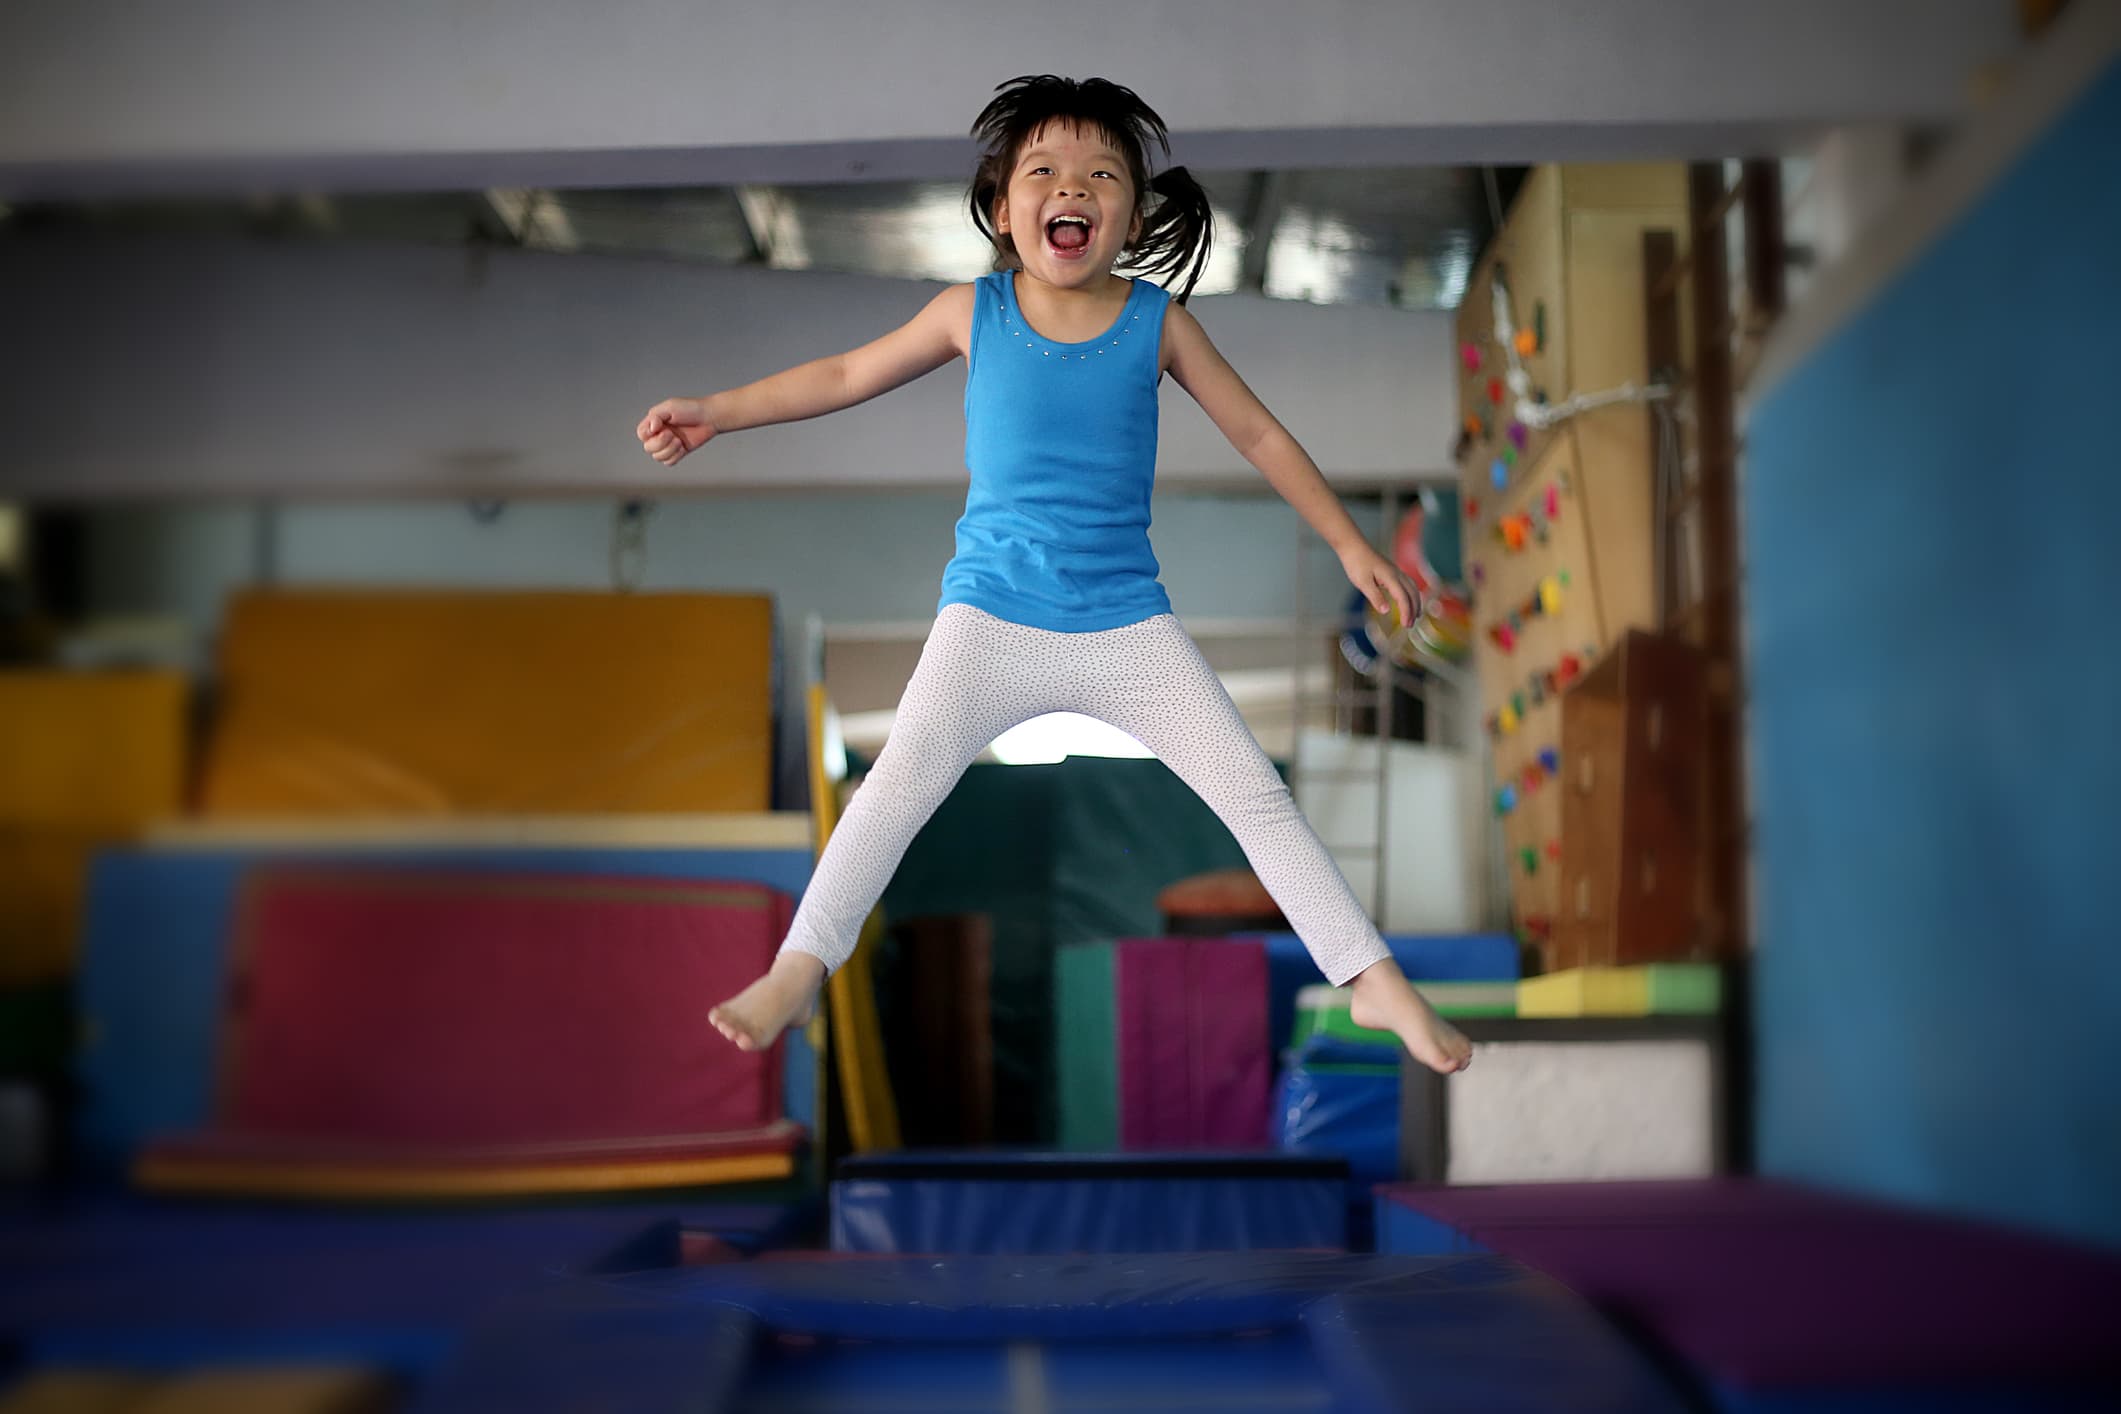 A young girl is enjoying herself with trampoline jump.